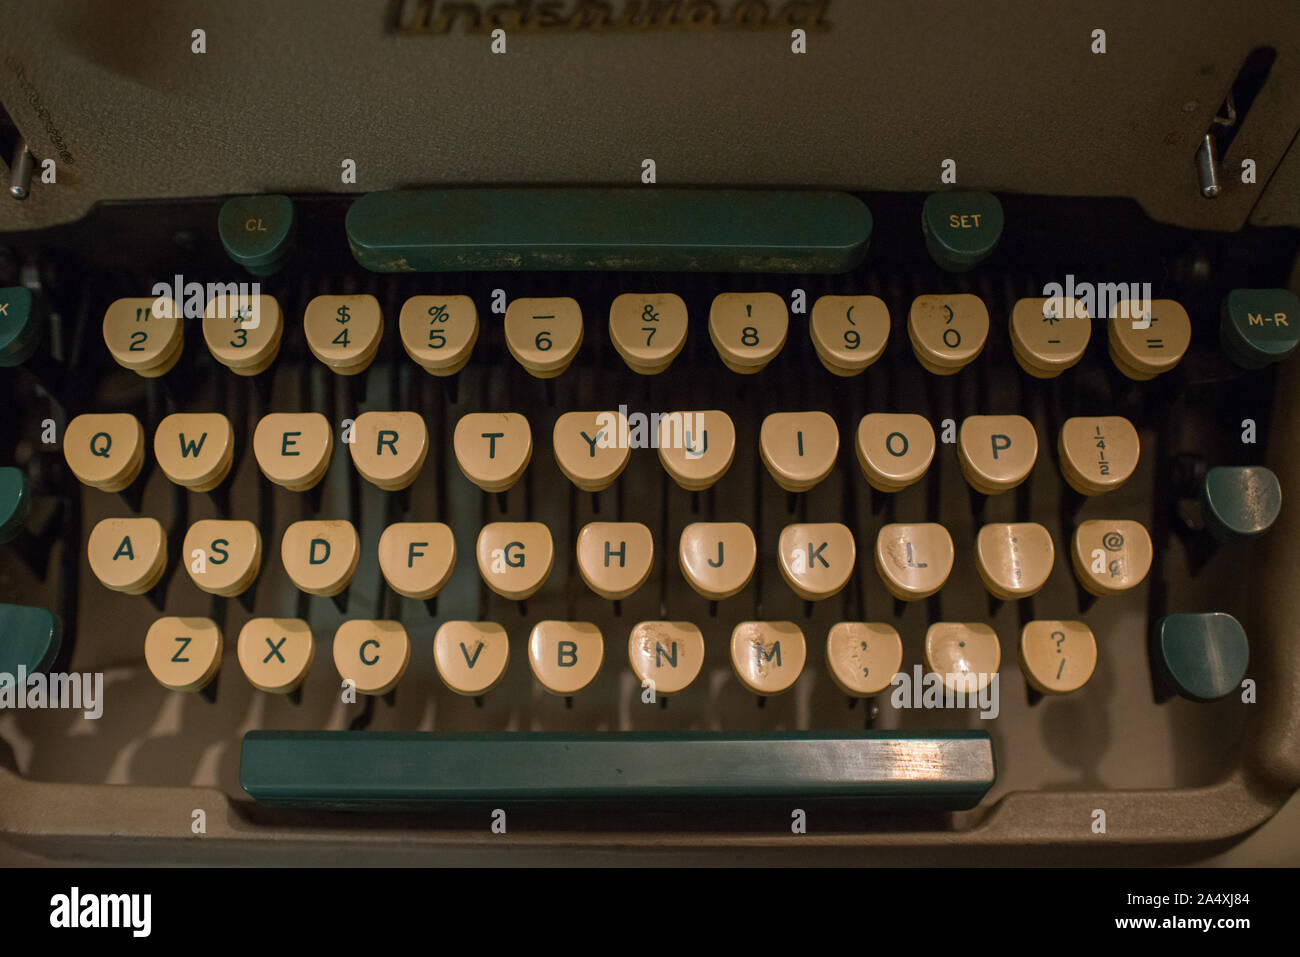 Old typewriters remind us that we have come a long way -- fast - from these mechanical machines to blazing fast computers in modern offices. Stock Photo